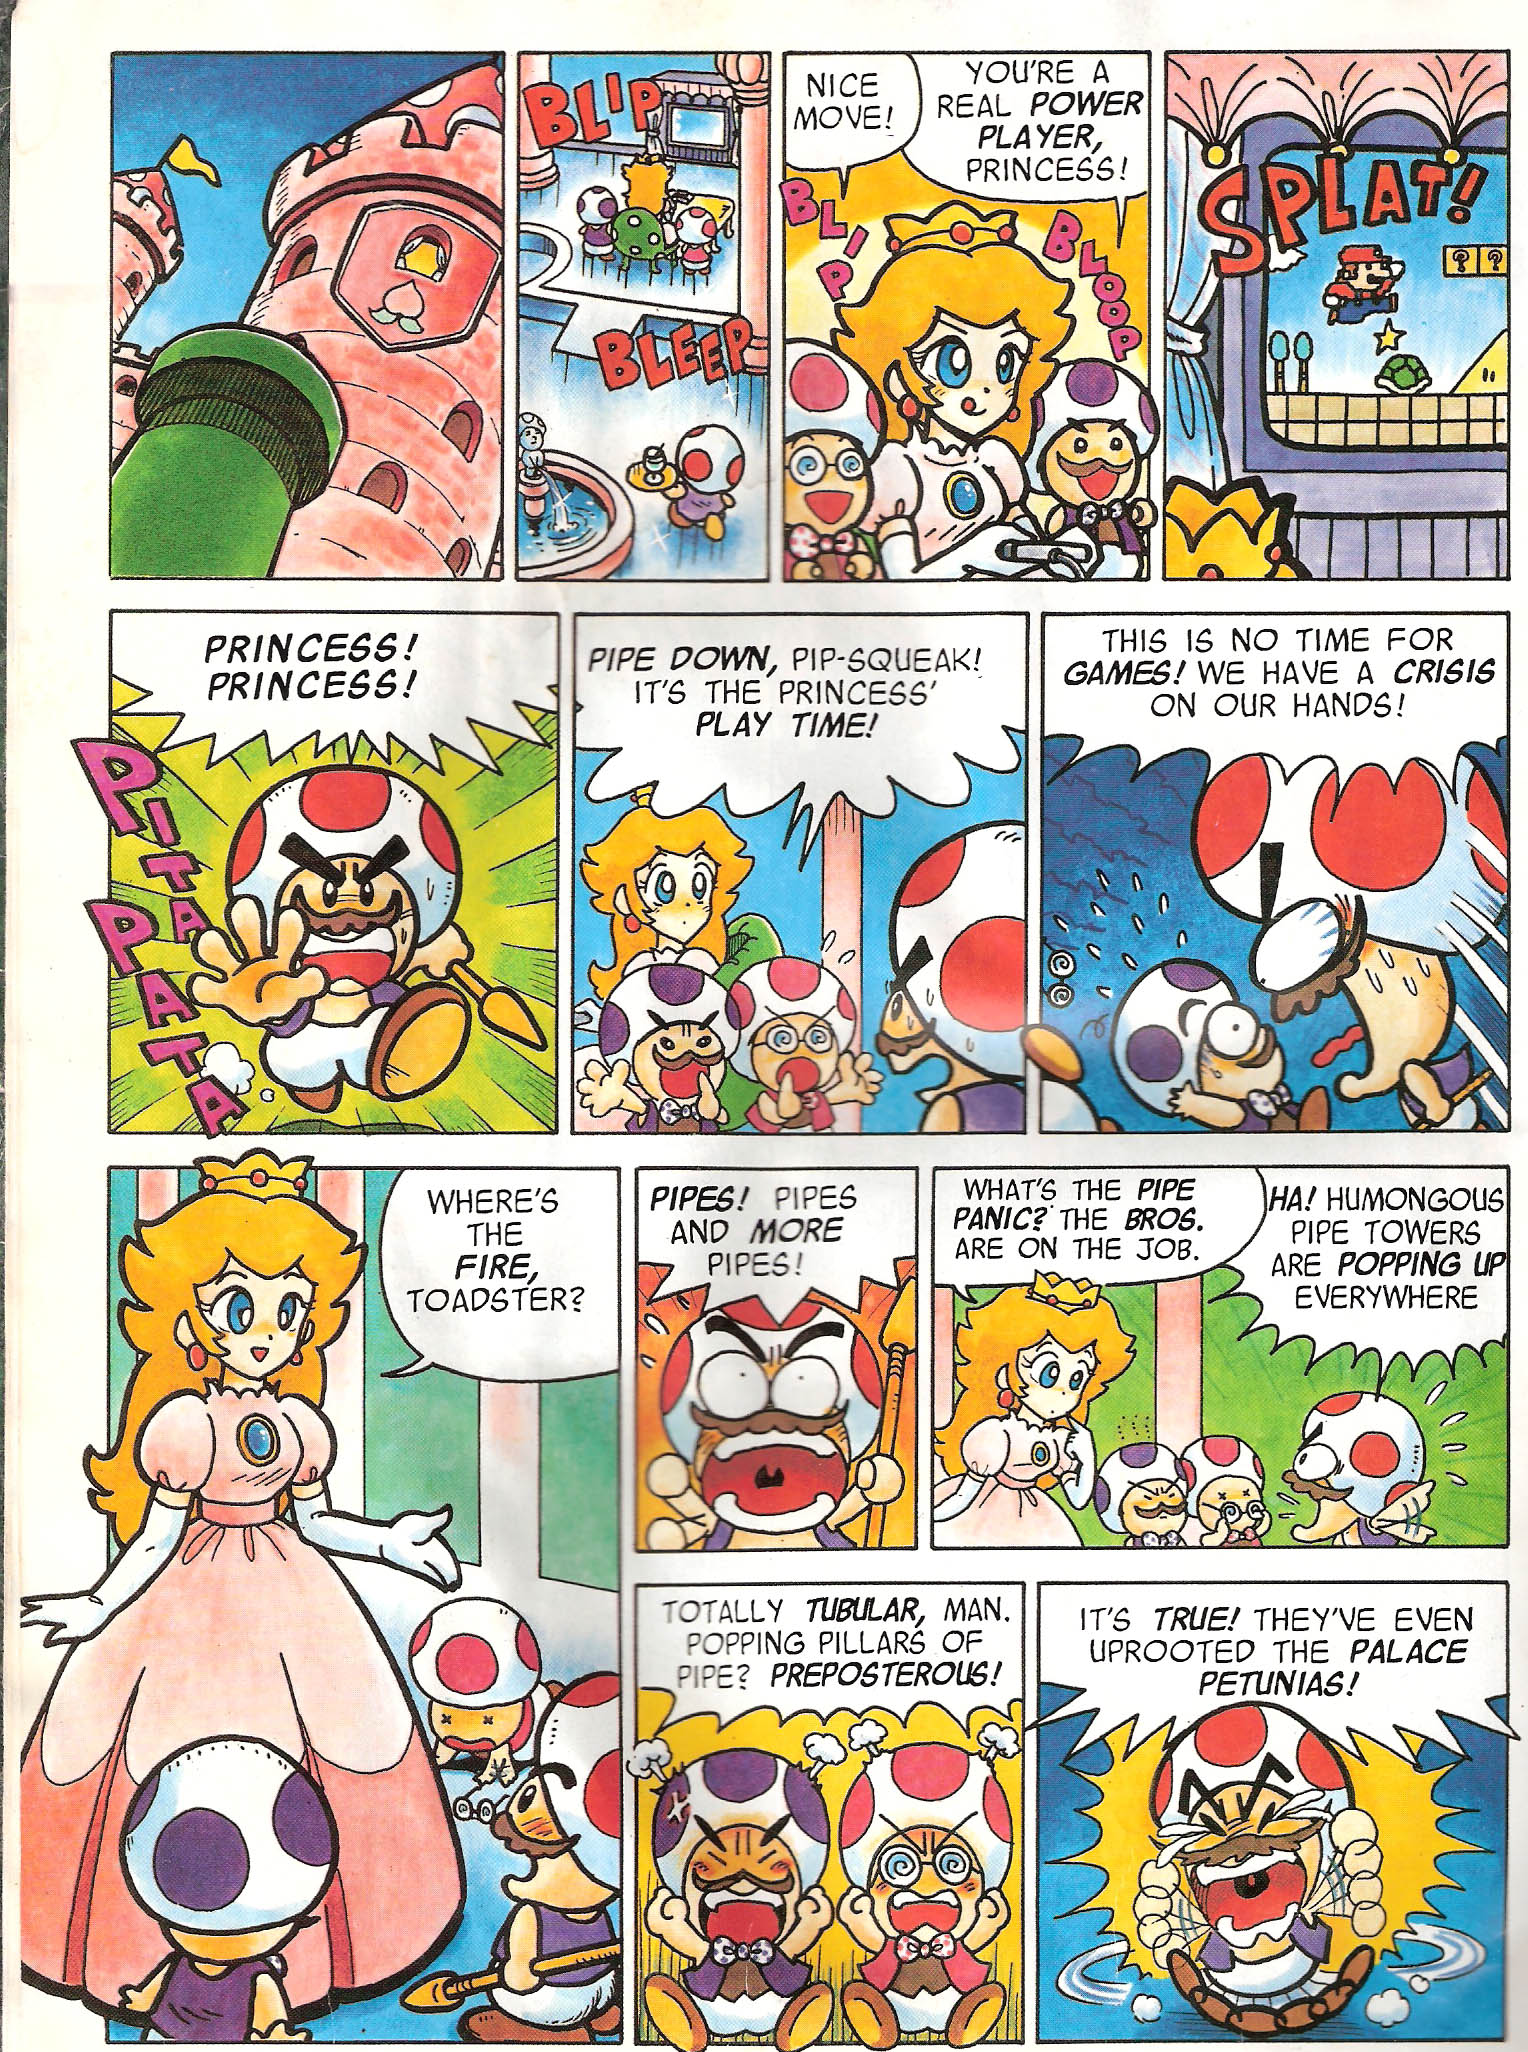 Super Mario Adventures Comic Pages 5 And 6 The Gonintendo Archives Gonintendo 8212